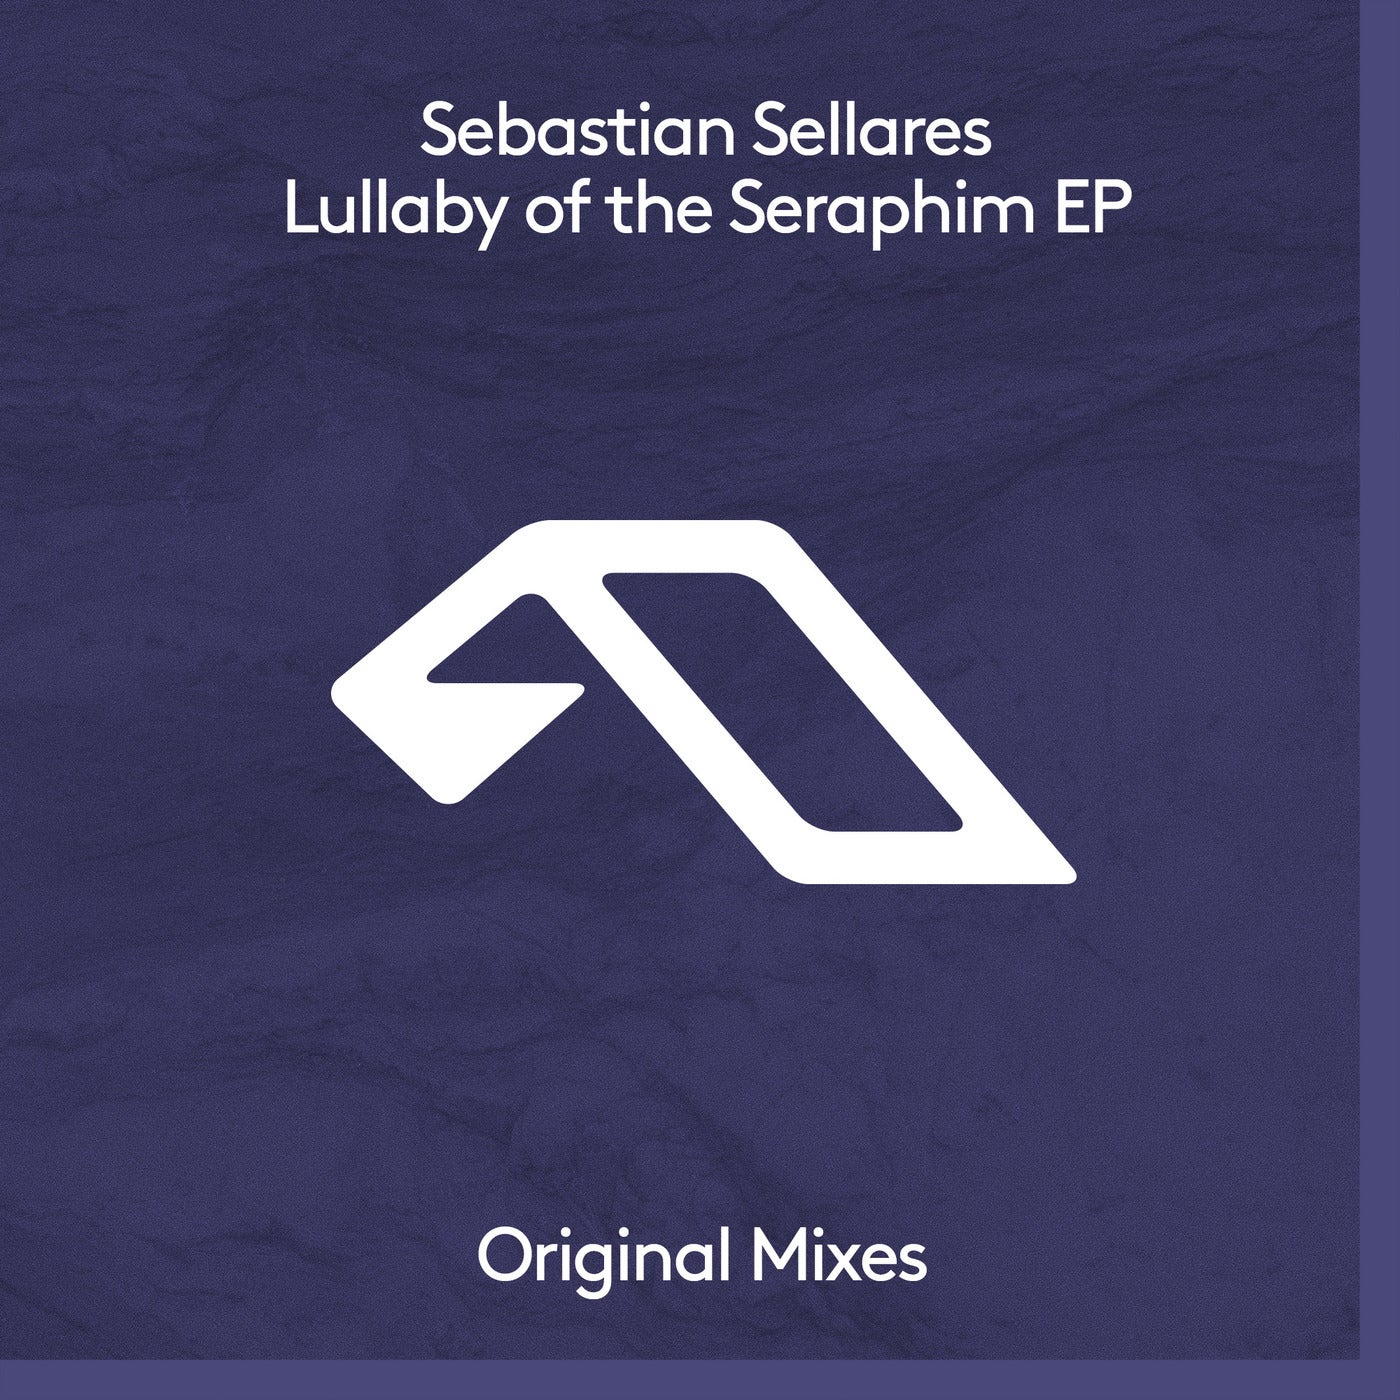 Lullaby of the Seraphim EP